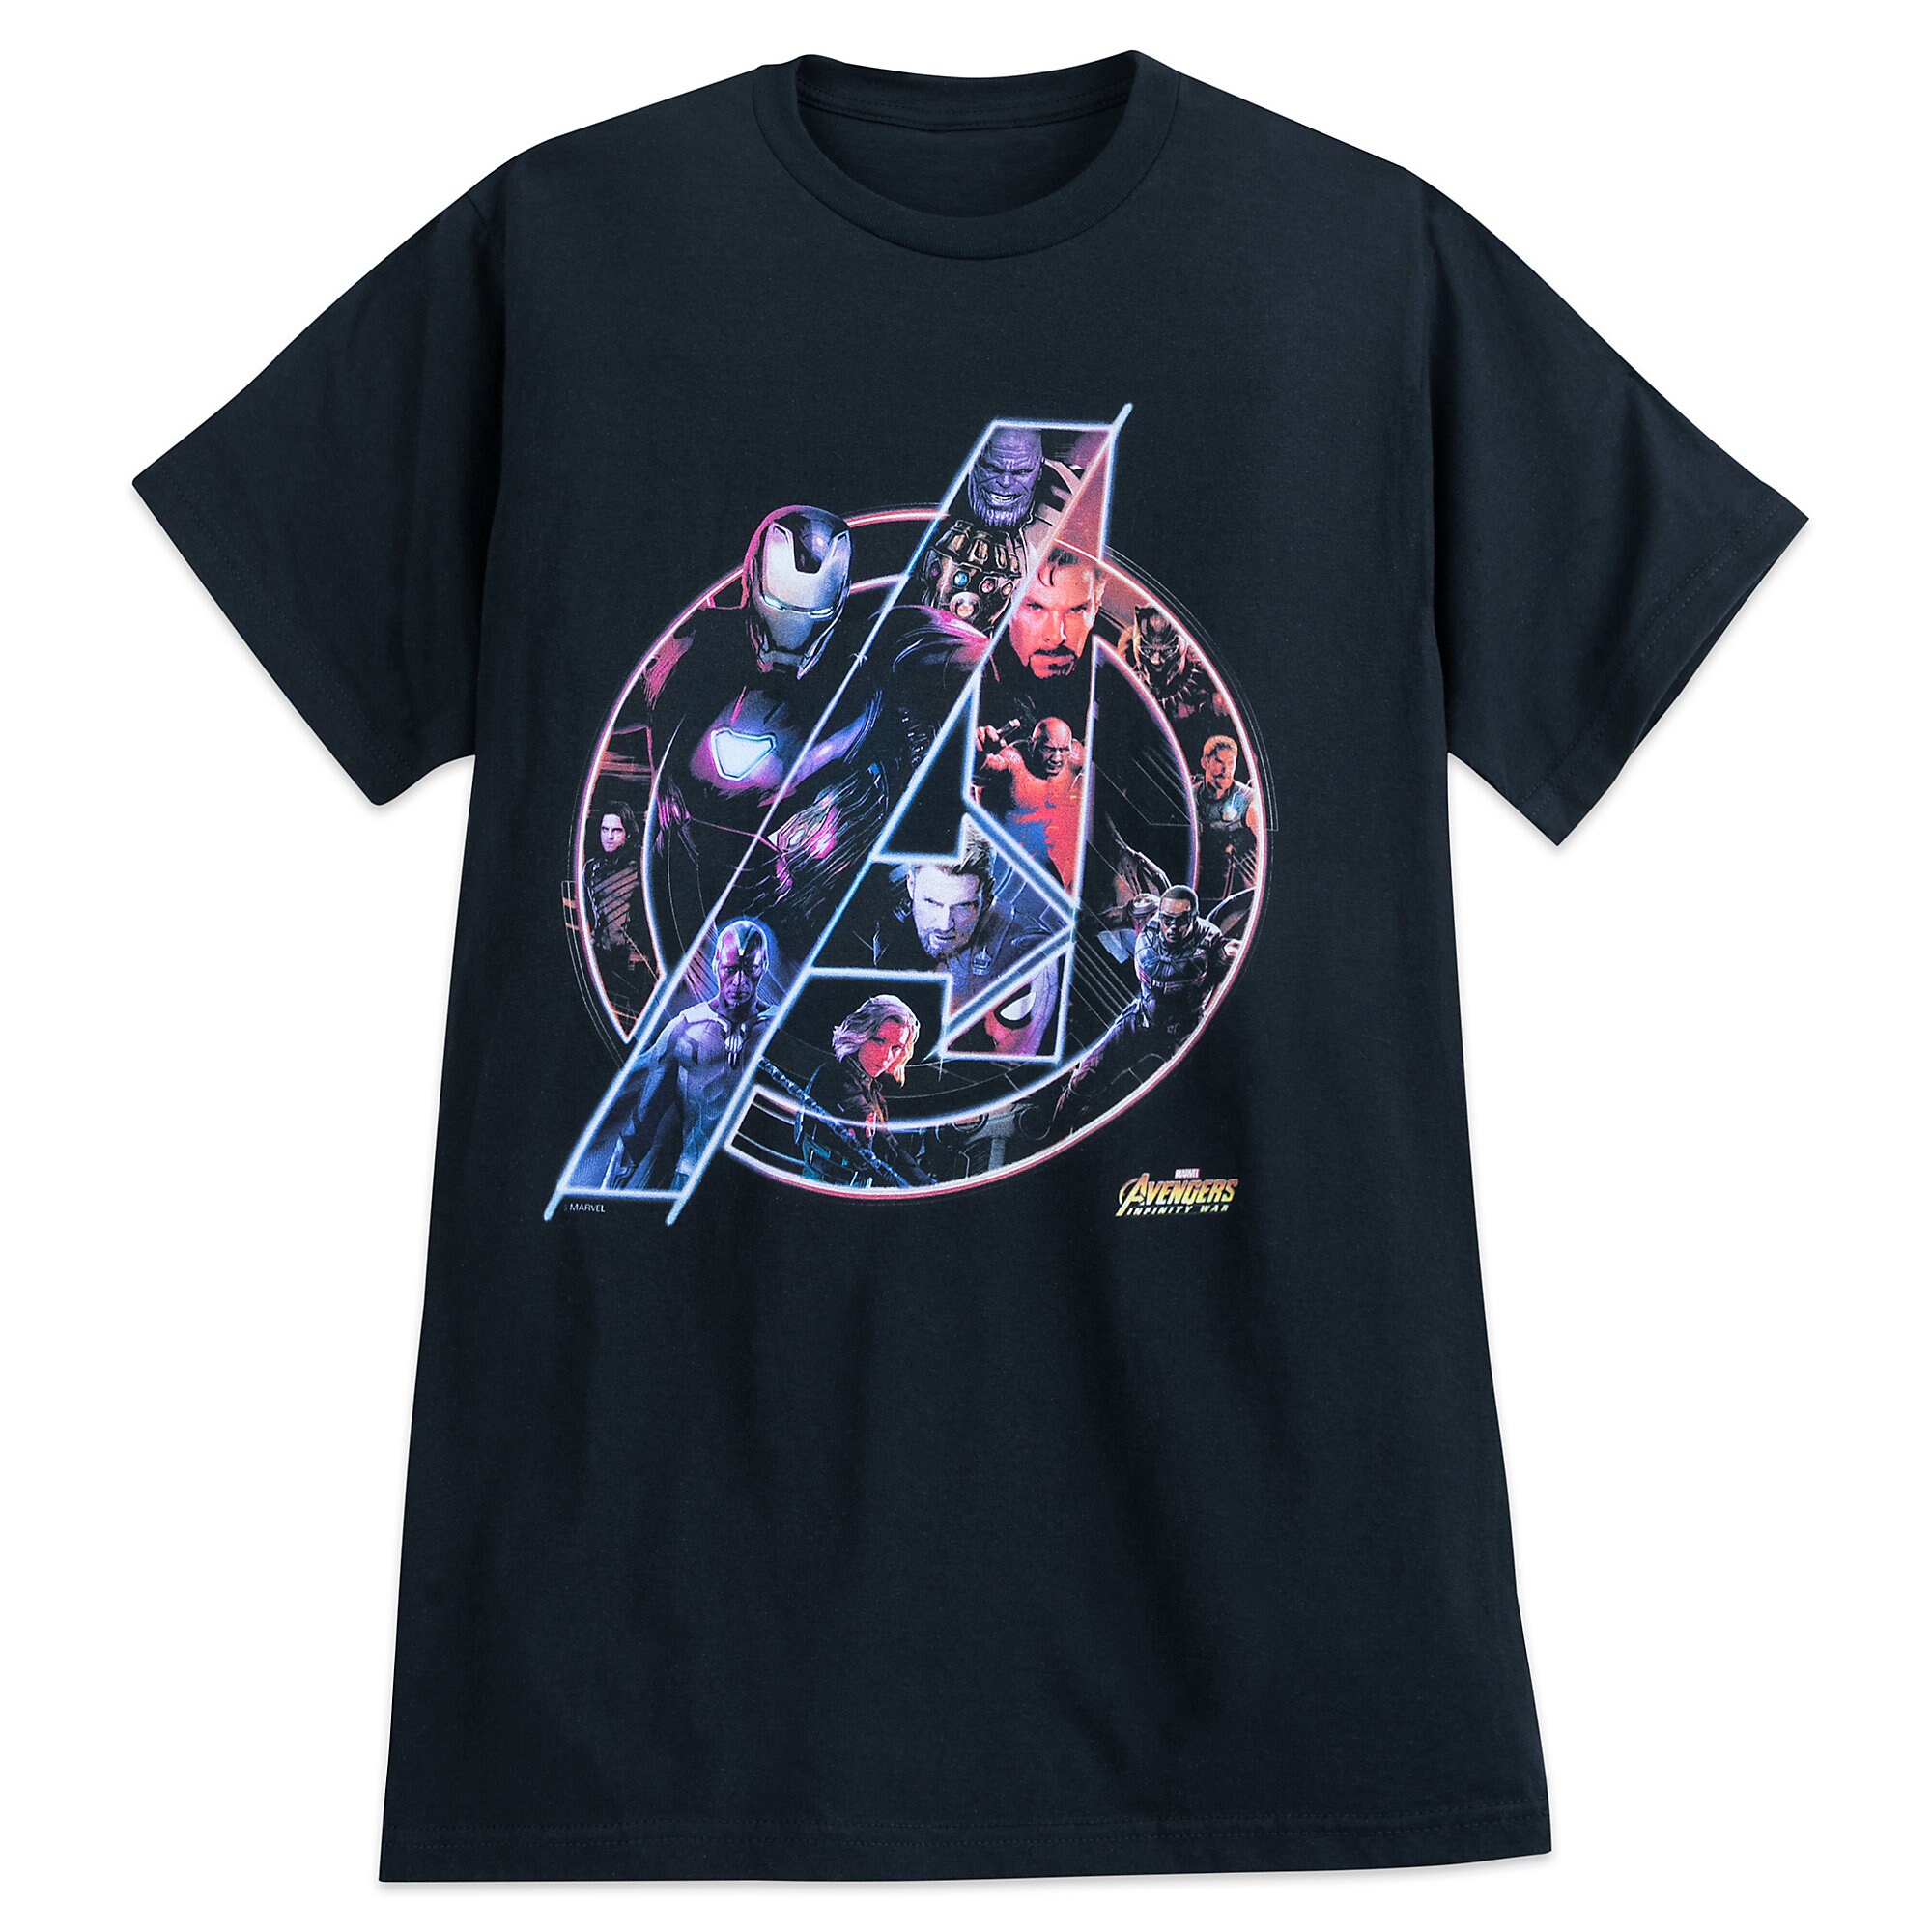 Avengers Icon T-Shirt for Adults - Marvel's Avengers: Infinity War now ...